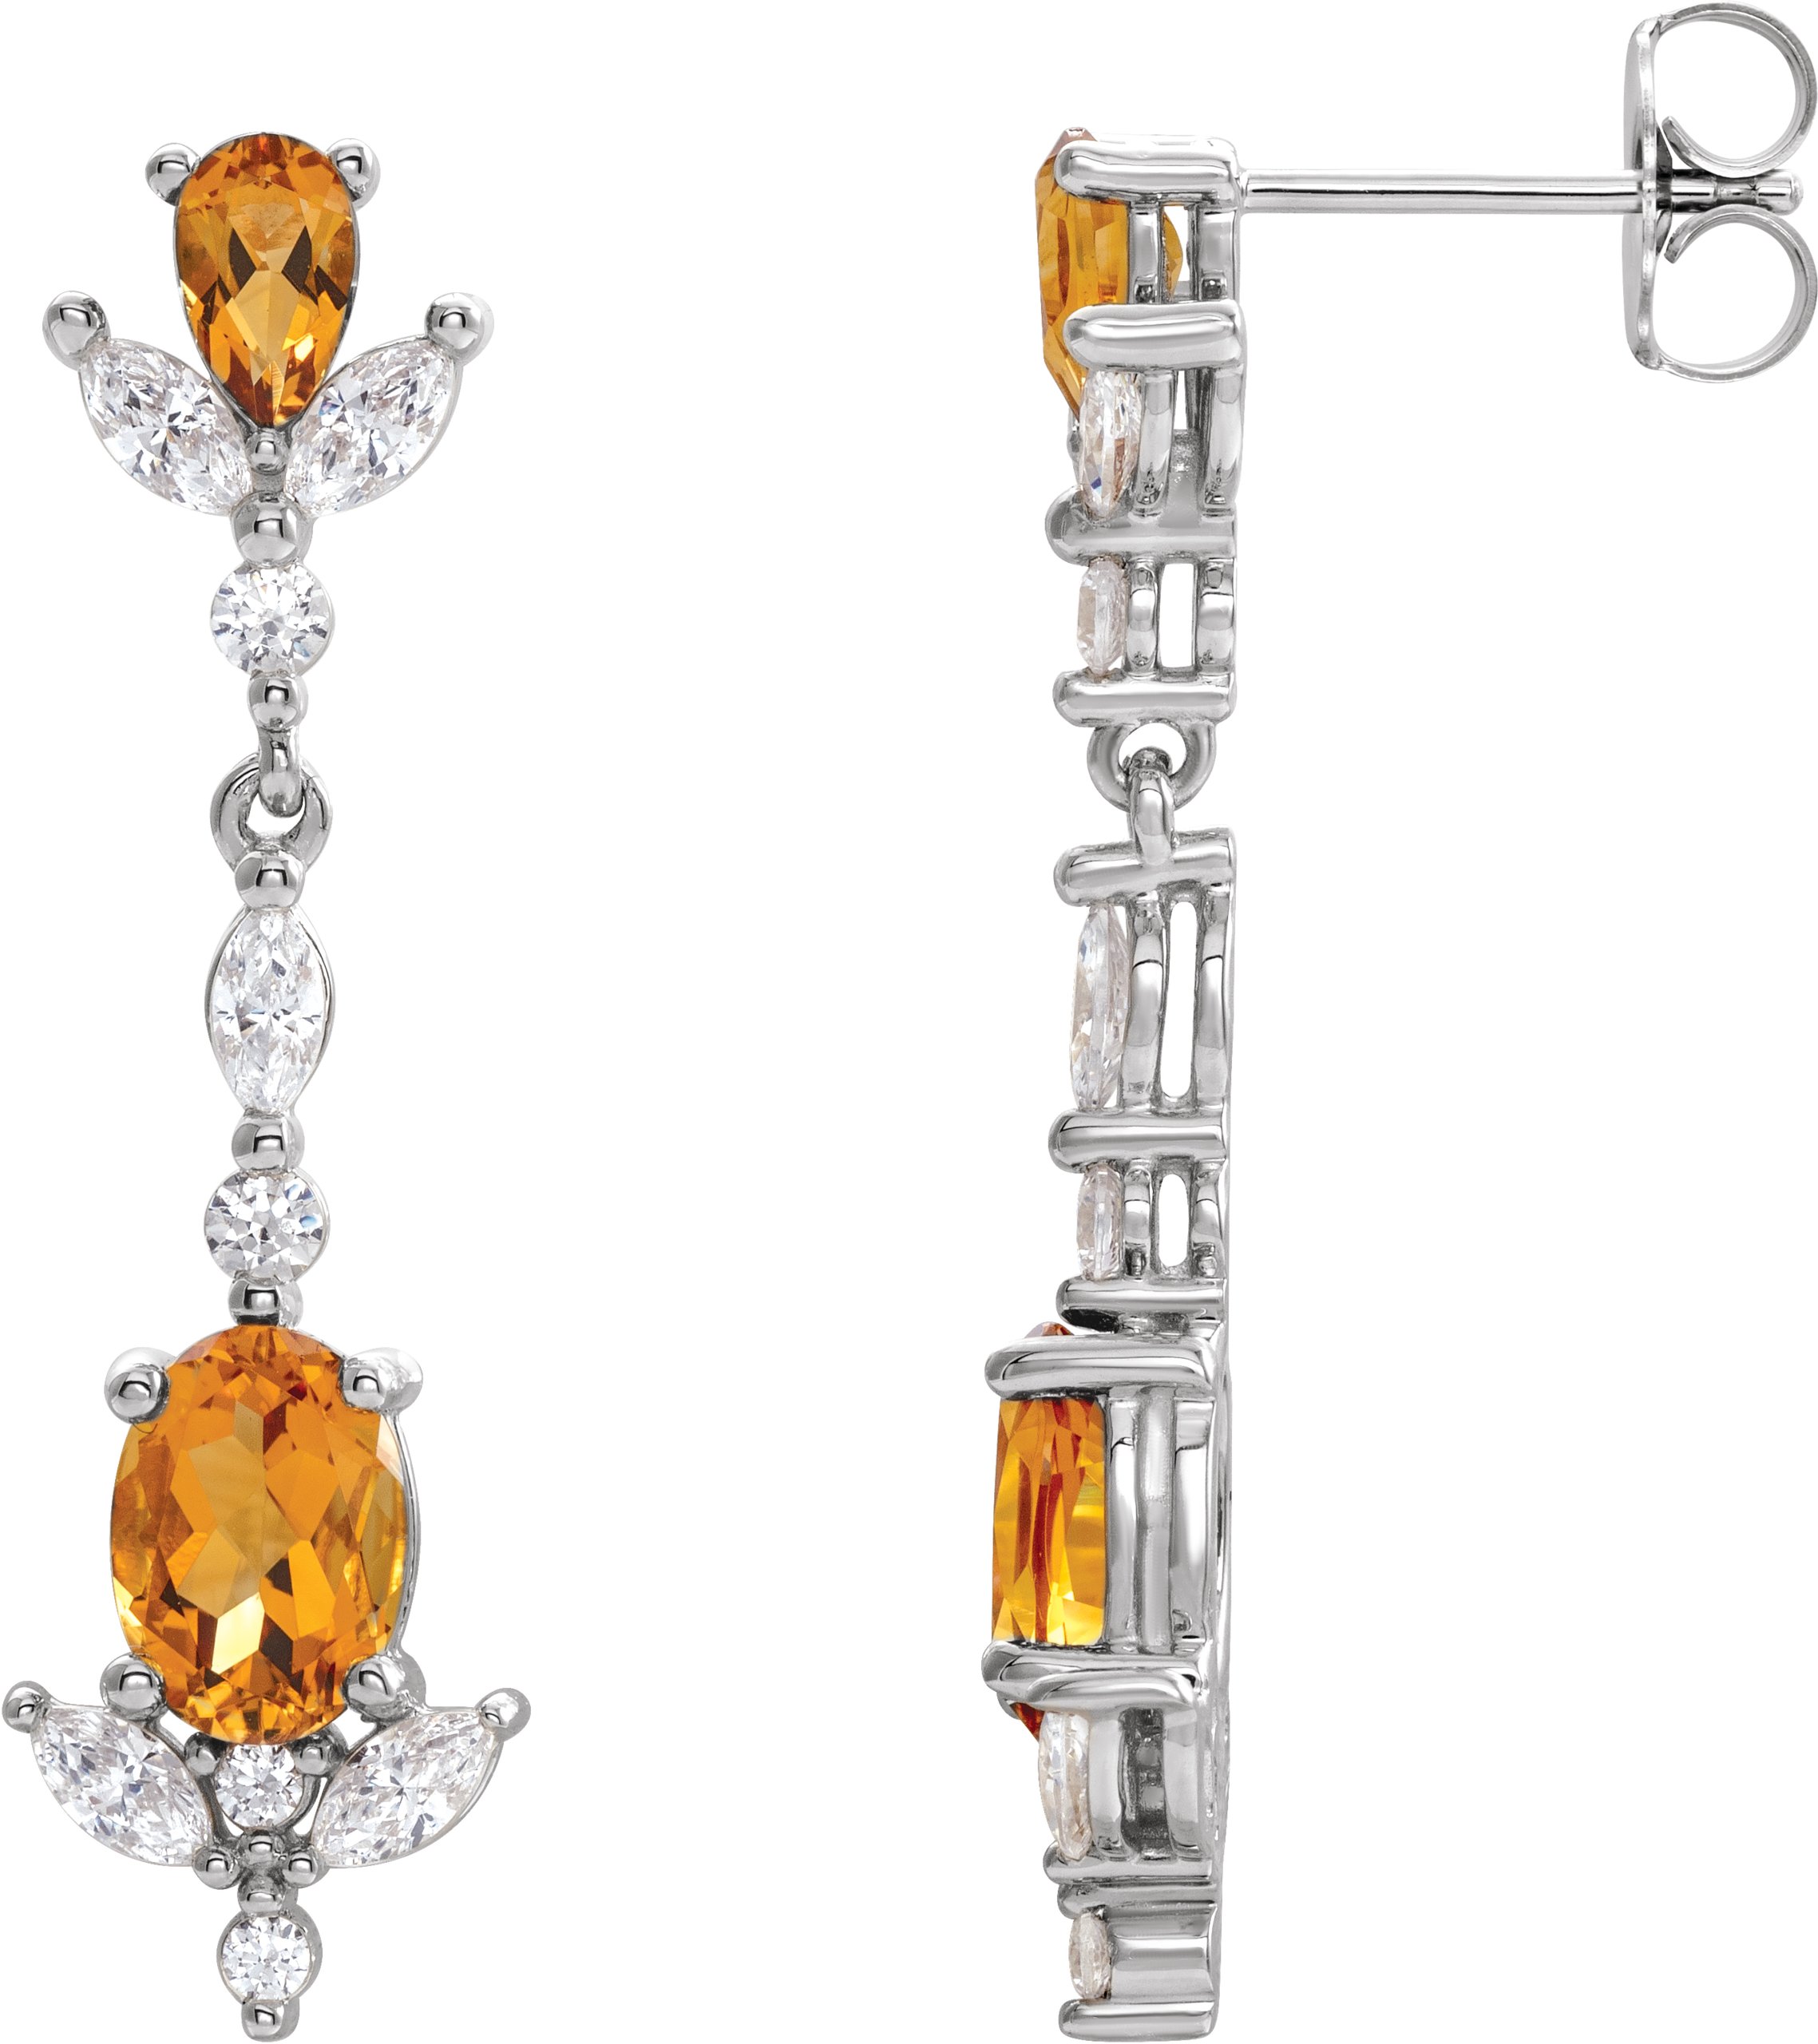 Sterling Silver Citrine and .75 CTW Diamond Earrings Ref 16078123